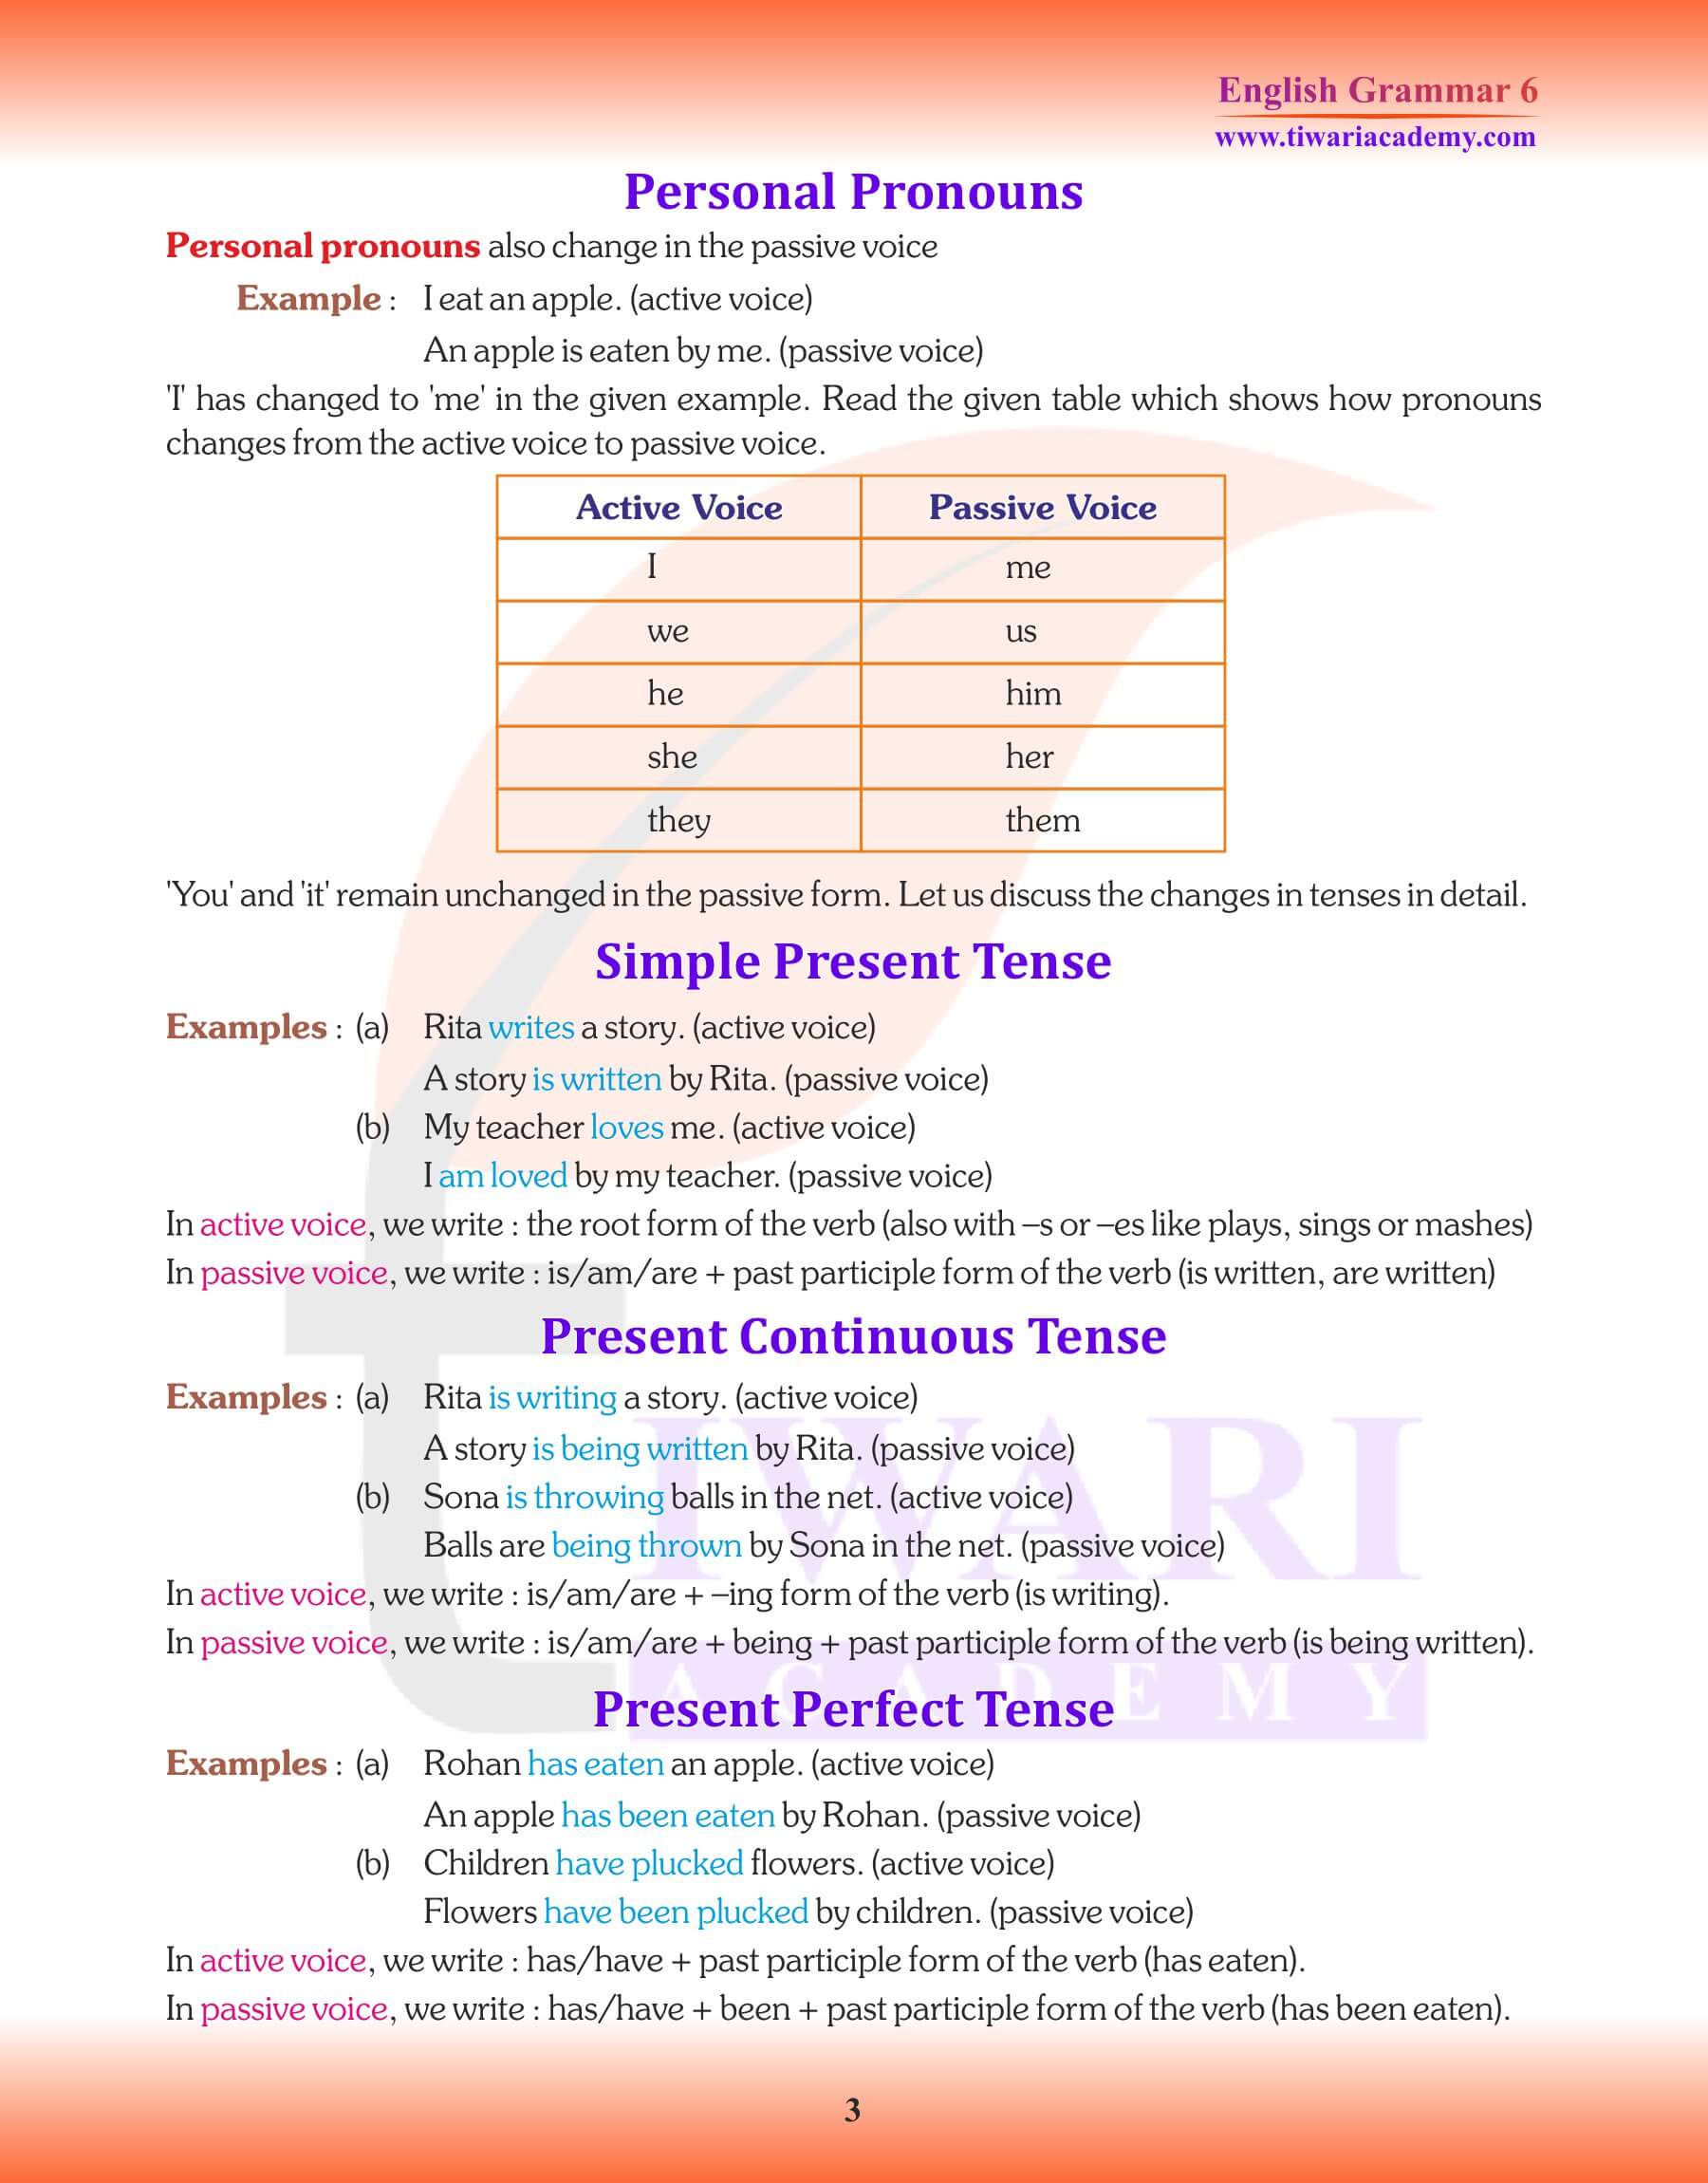 Class 6 Grammar Active and Passive Voice Revision notes